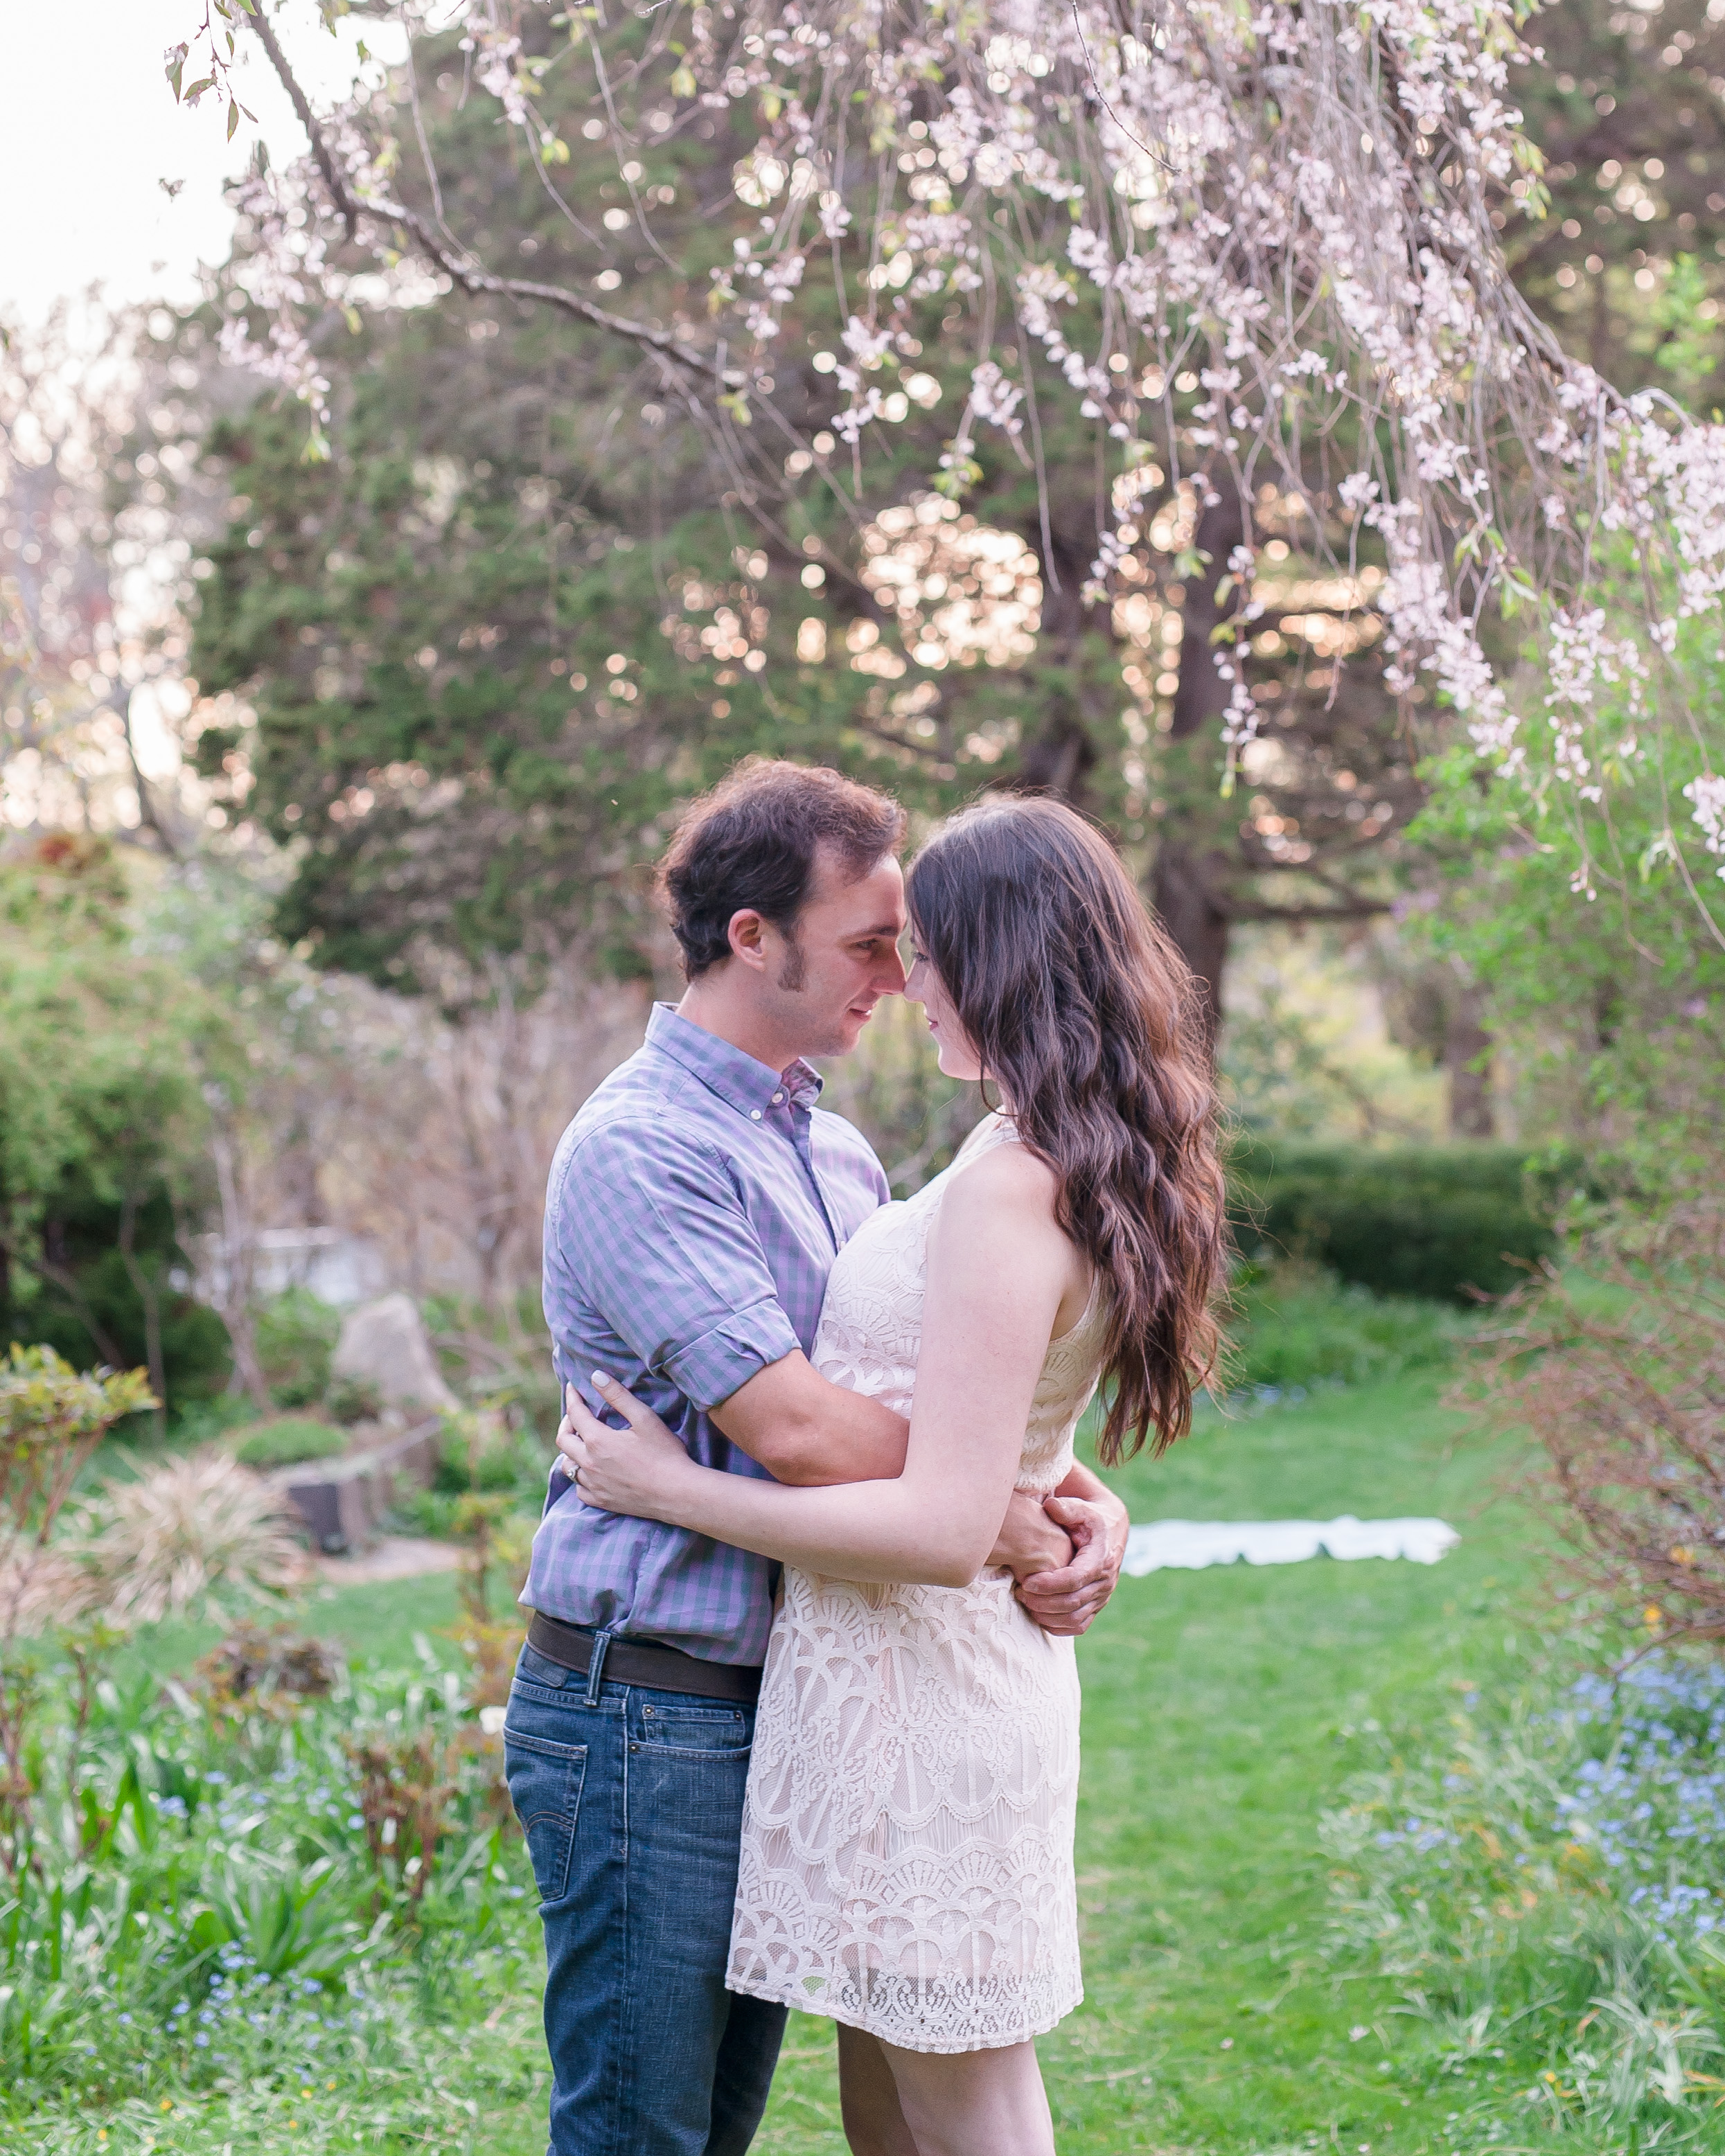 Sean and Nicole Beverly spring blossom engagement-40.jpg